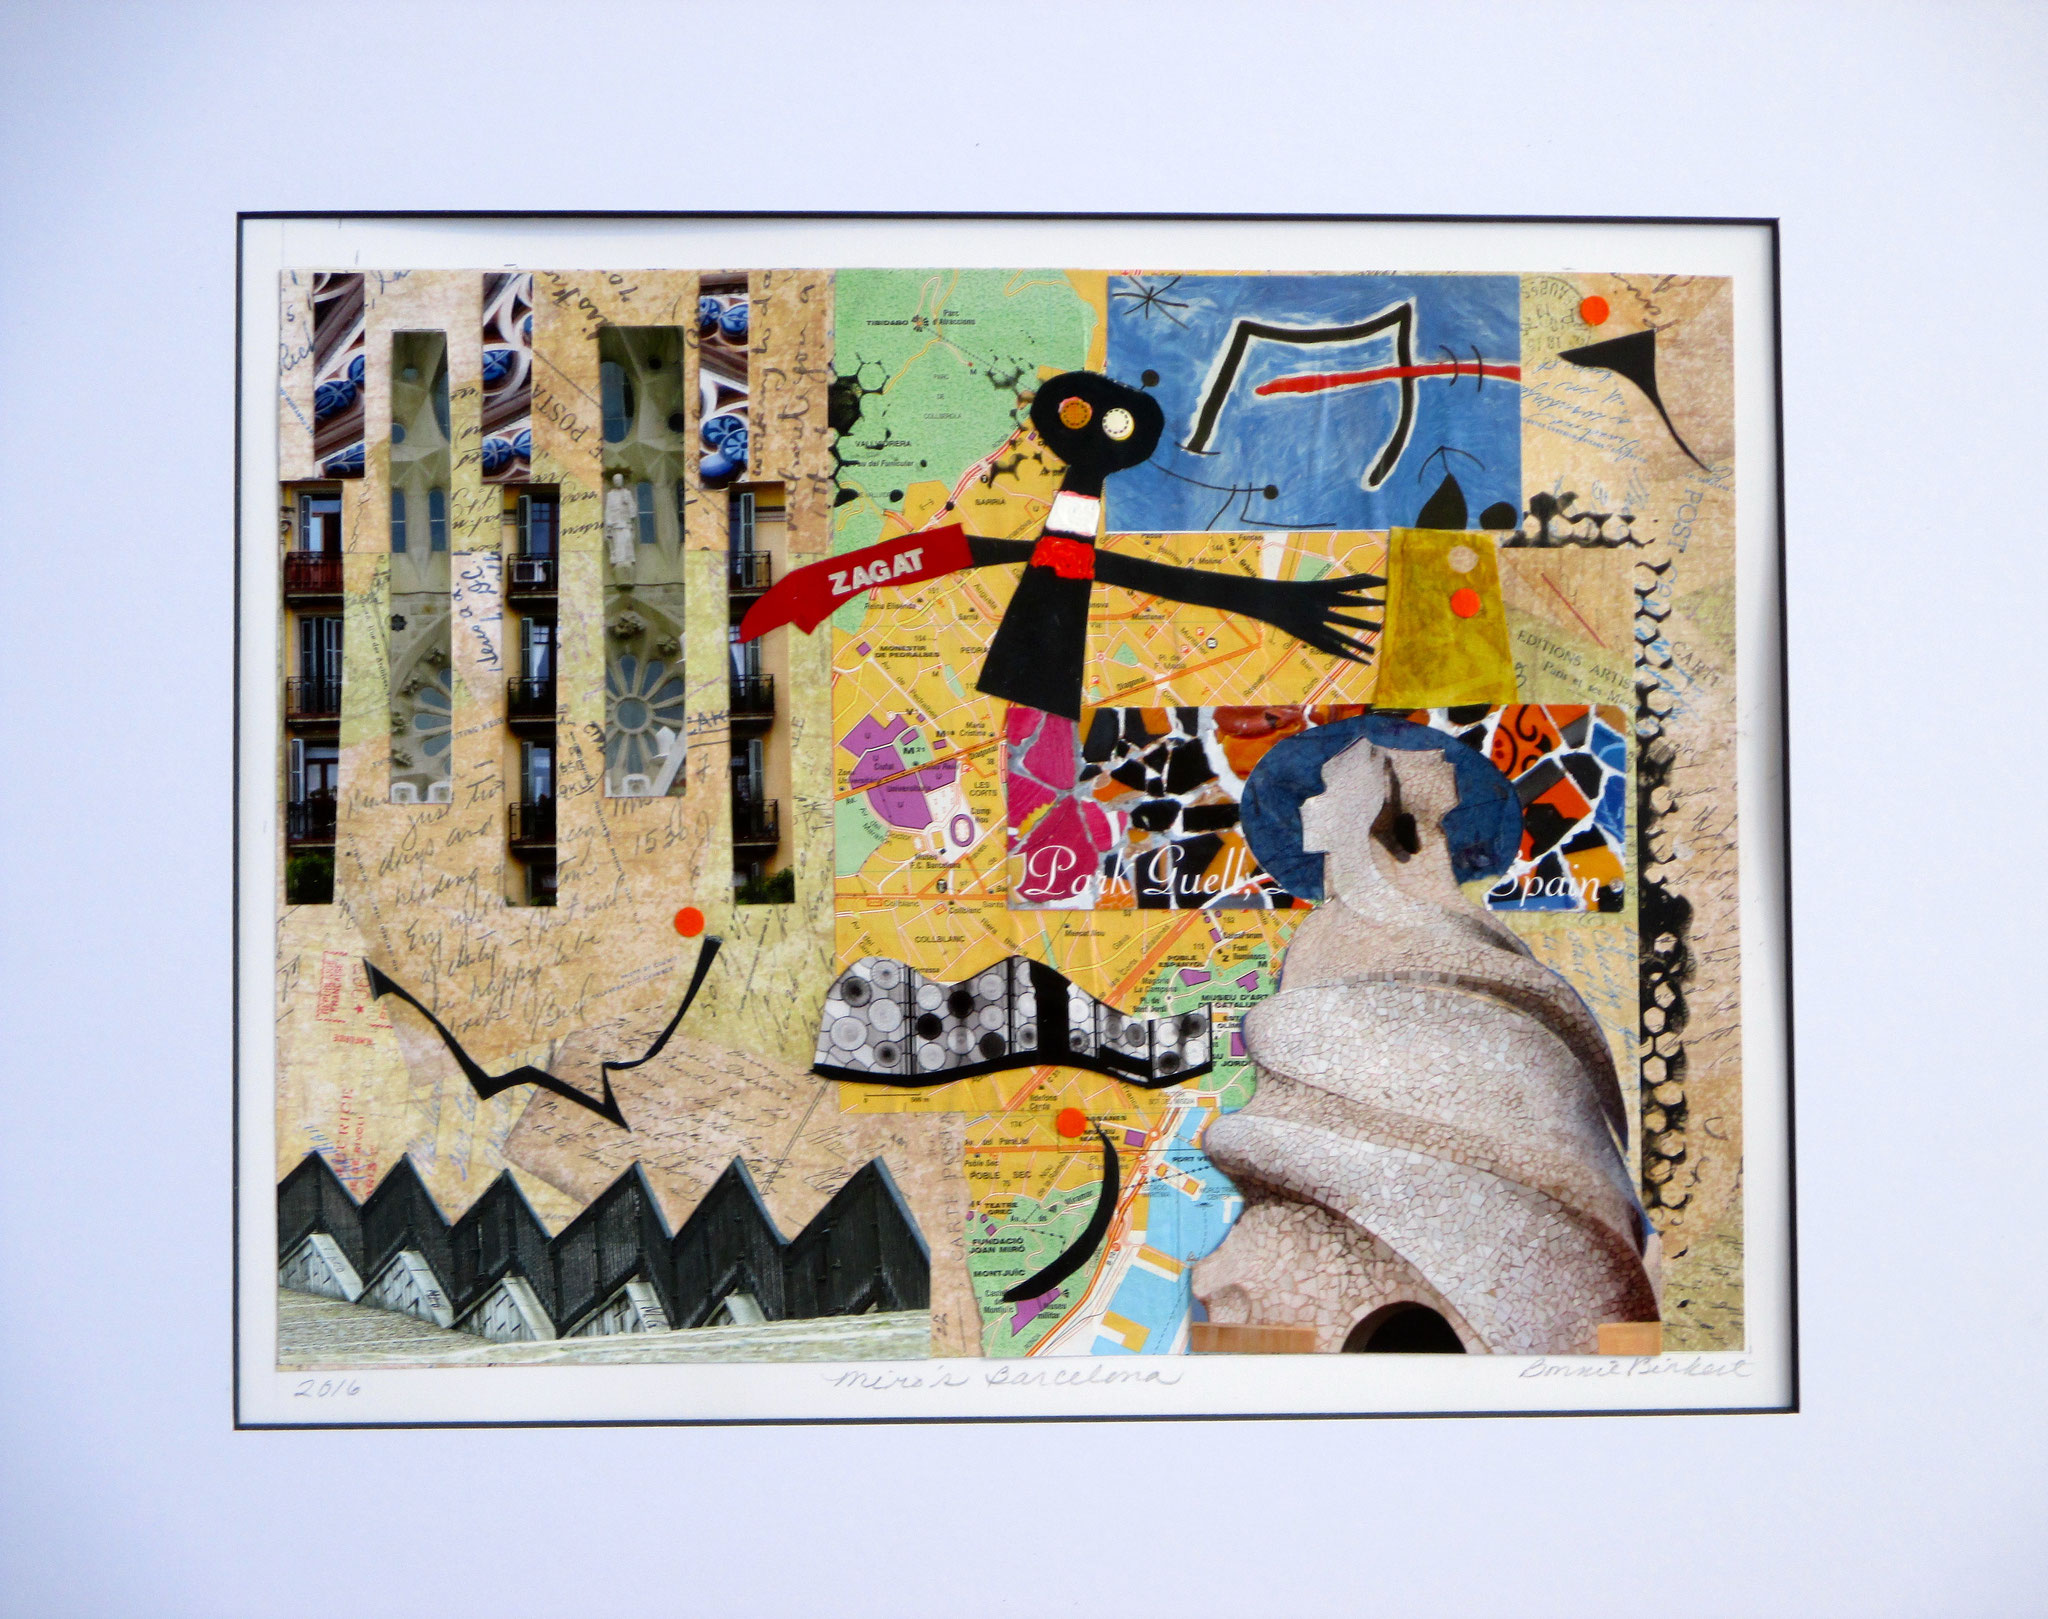 Miro's Barcelona, collage on paper, 20 x 16, matted, 2016